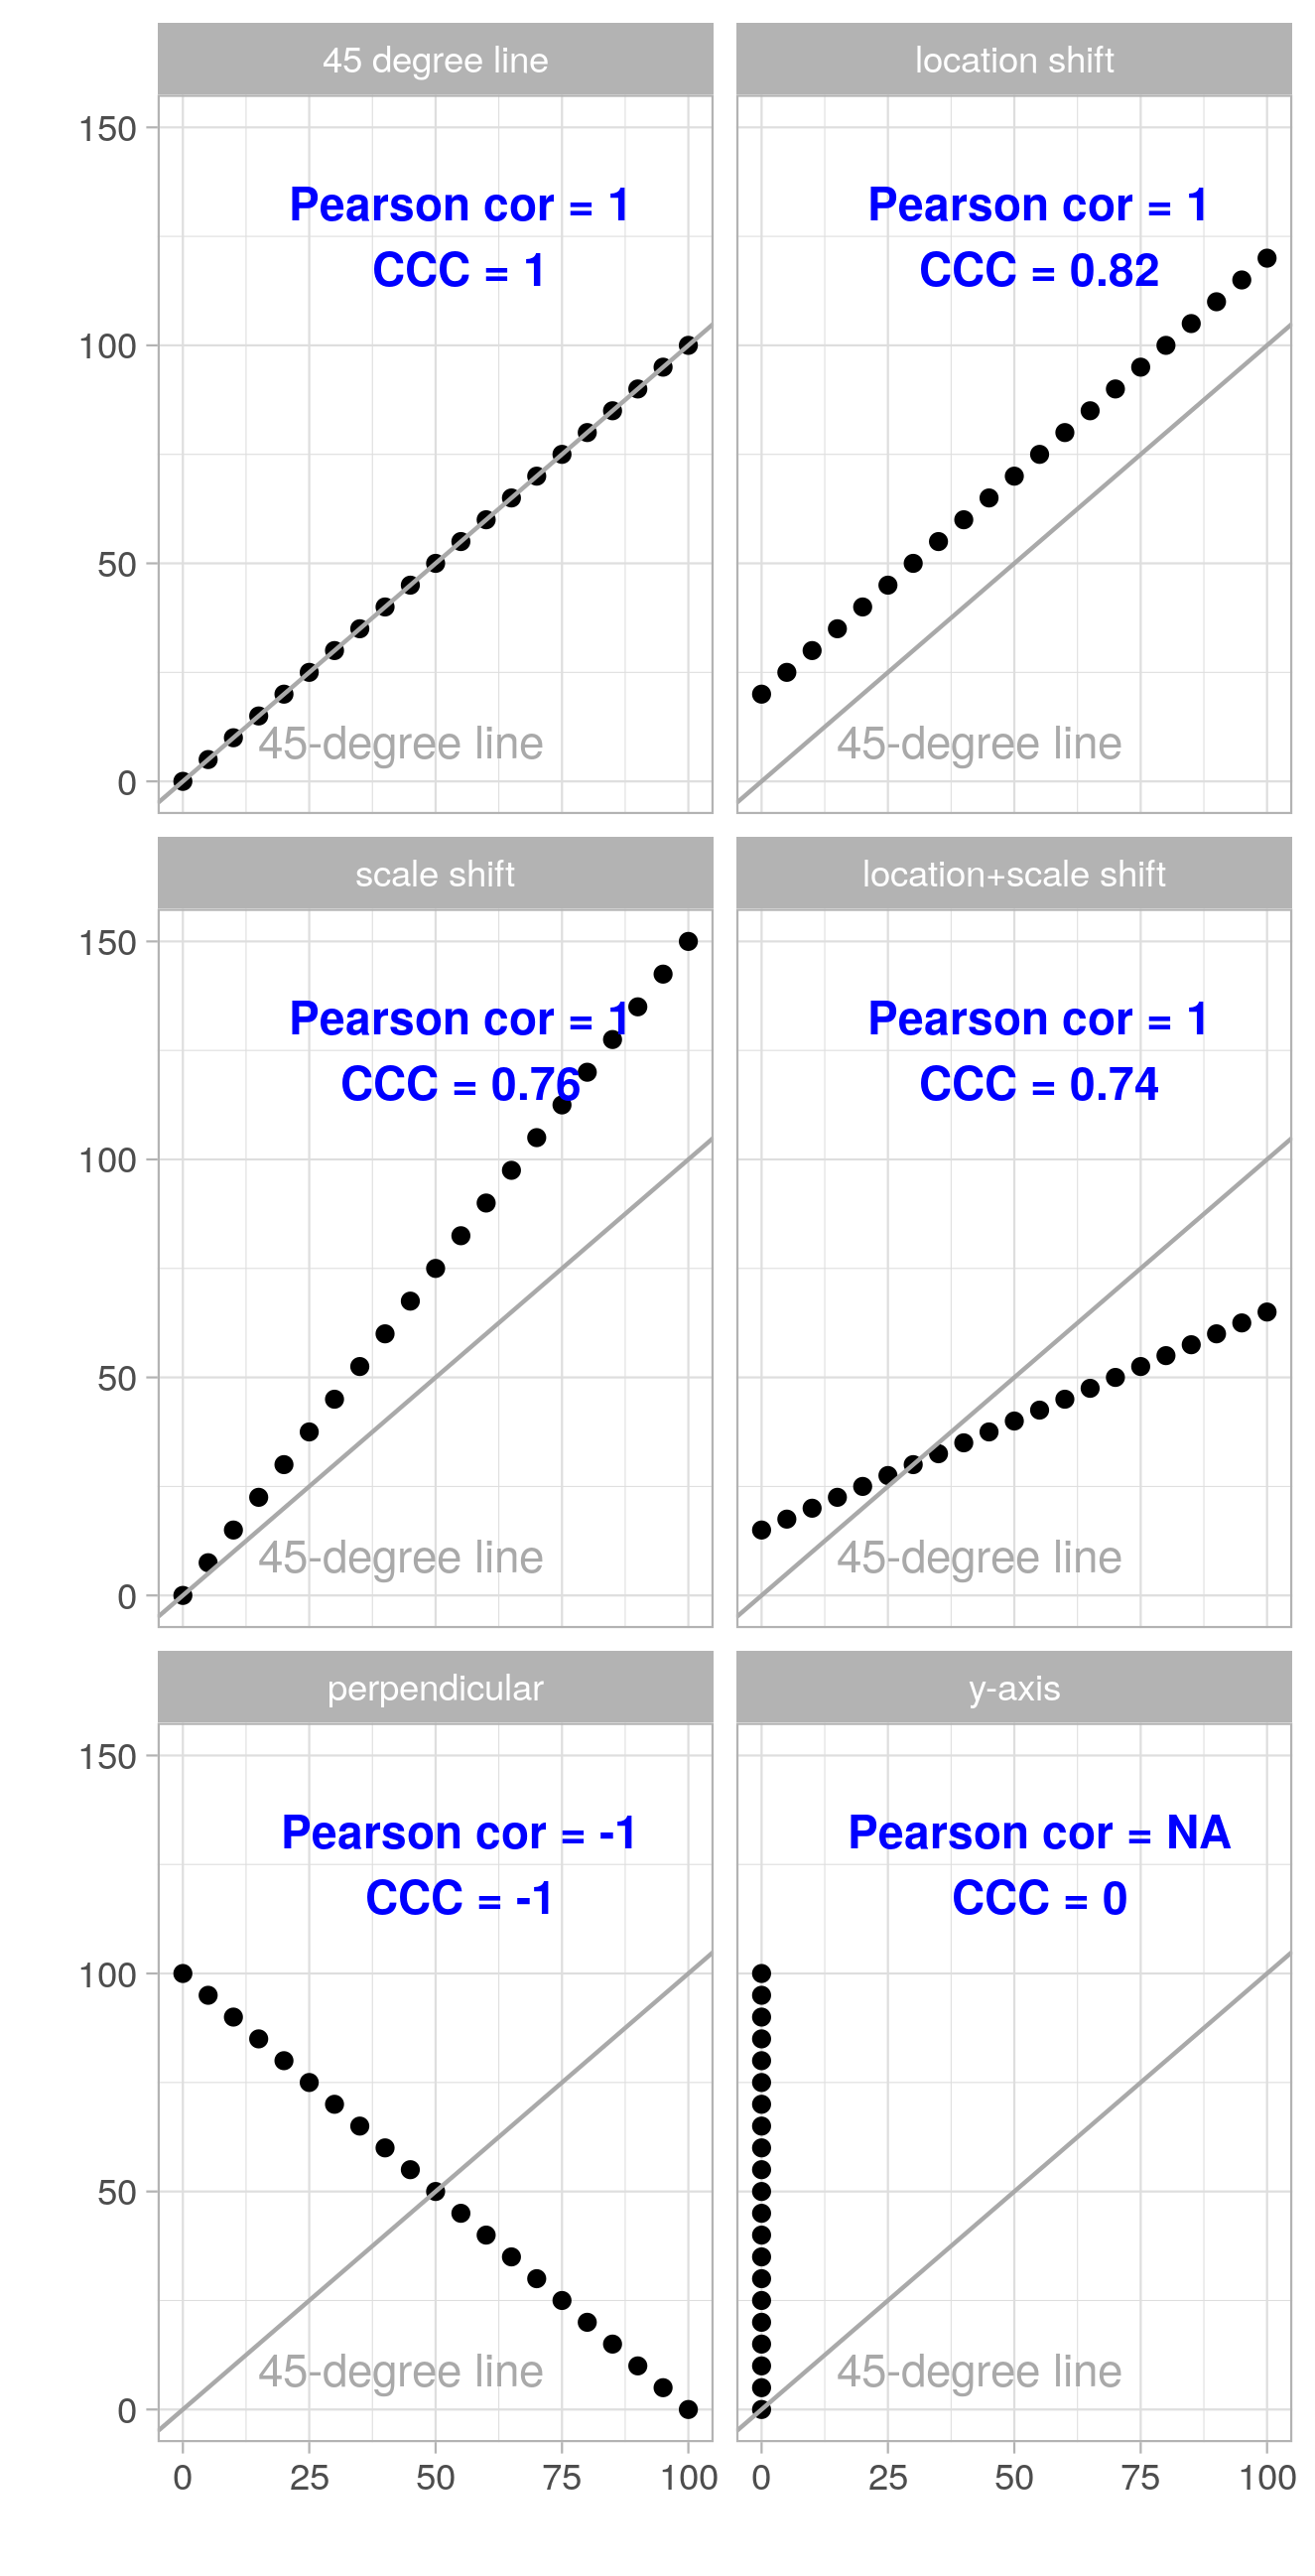 Figures of examples showing the effects of location and/or scale shift on Pearson correlation coefficient and on CCC.